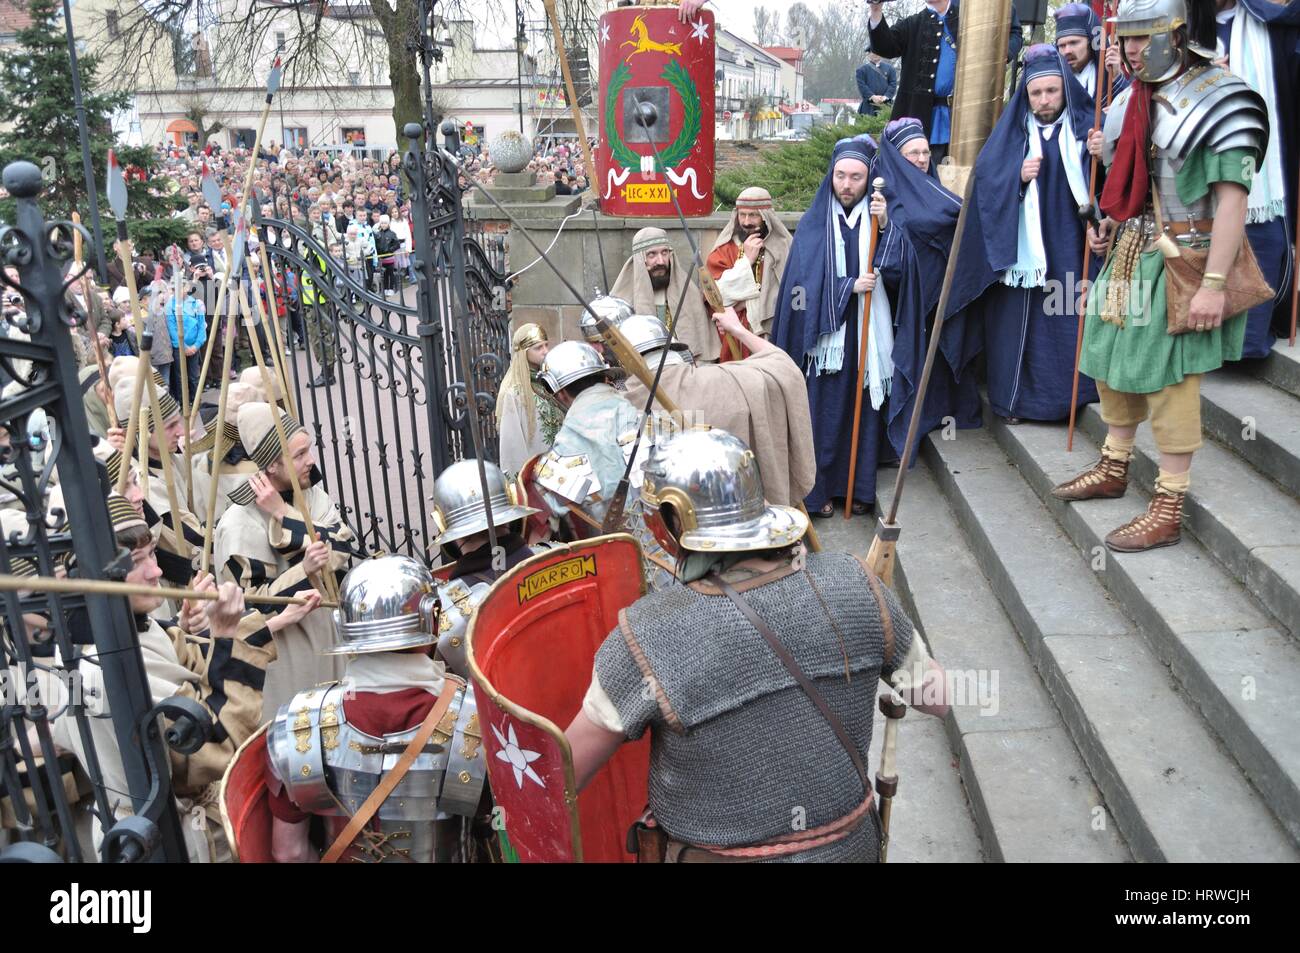 Actors reenact guards defending the entrance to Pilate, during the street performances Mystery of the Passion. Stock Photo